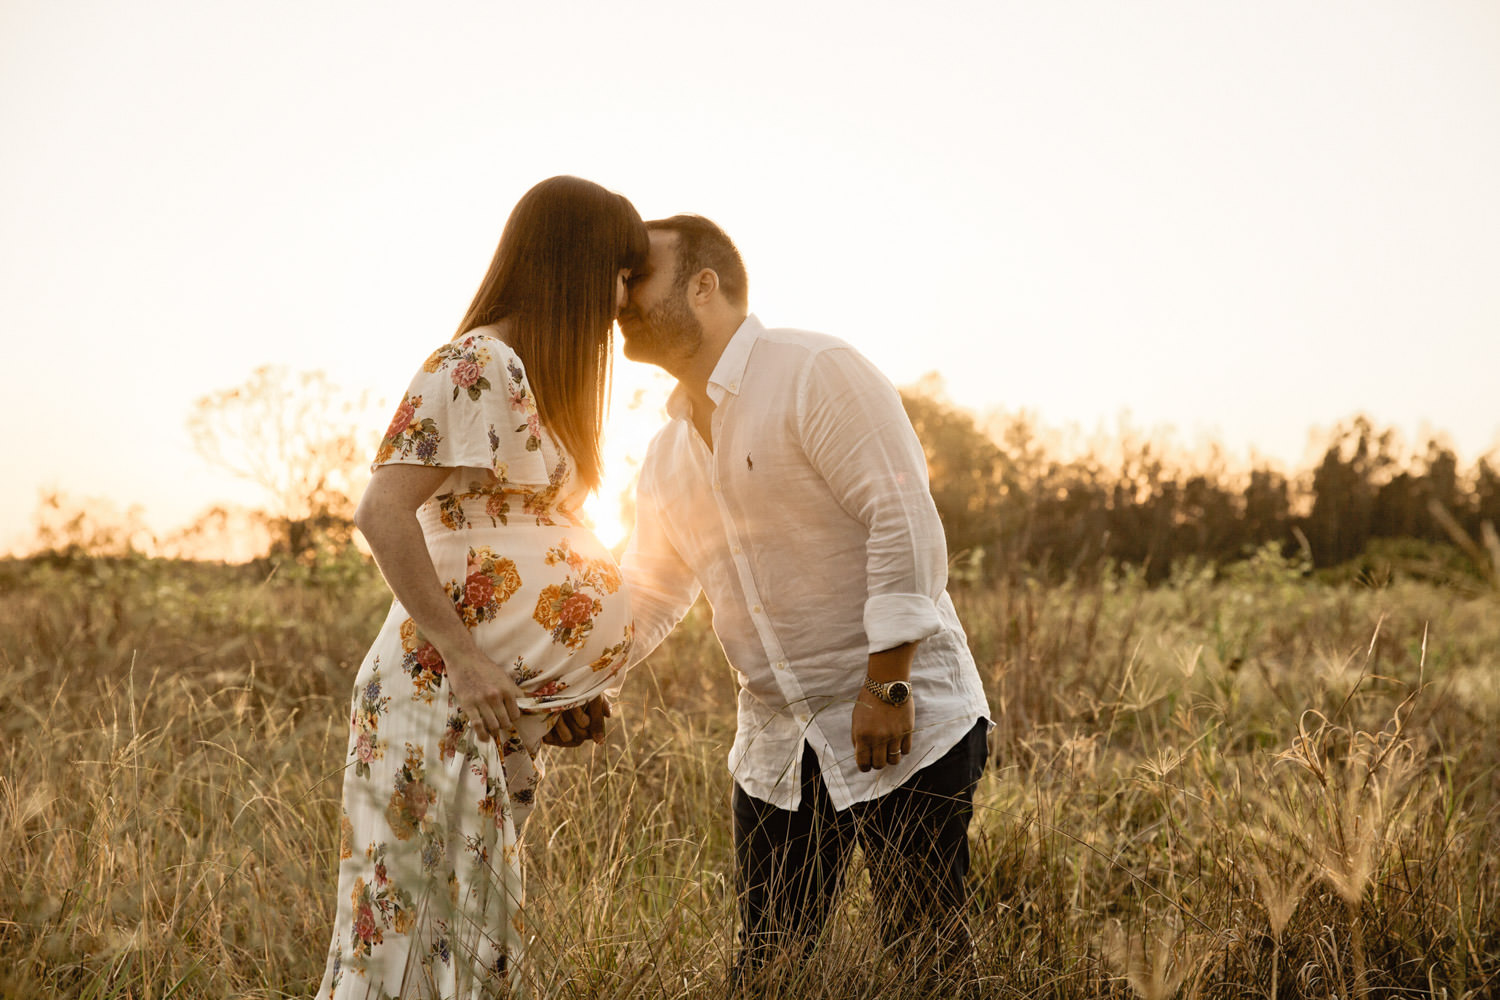 Sunrise-field_Maternity_Newborn_Family-Photography-Packages_Beach_Brisbane-GoldCoast-Natural-1